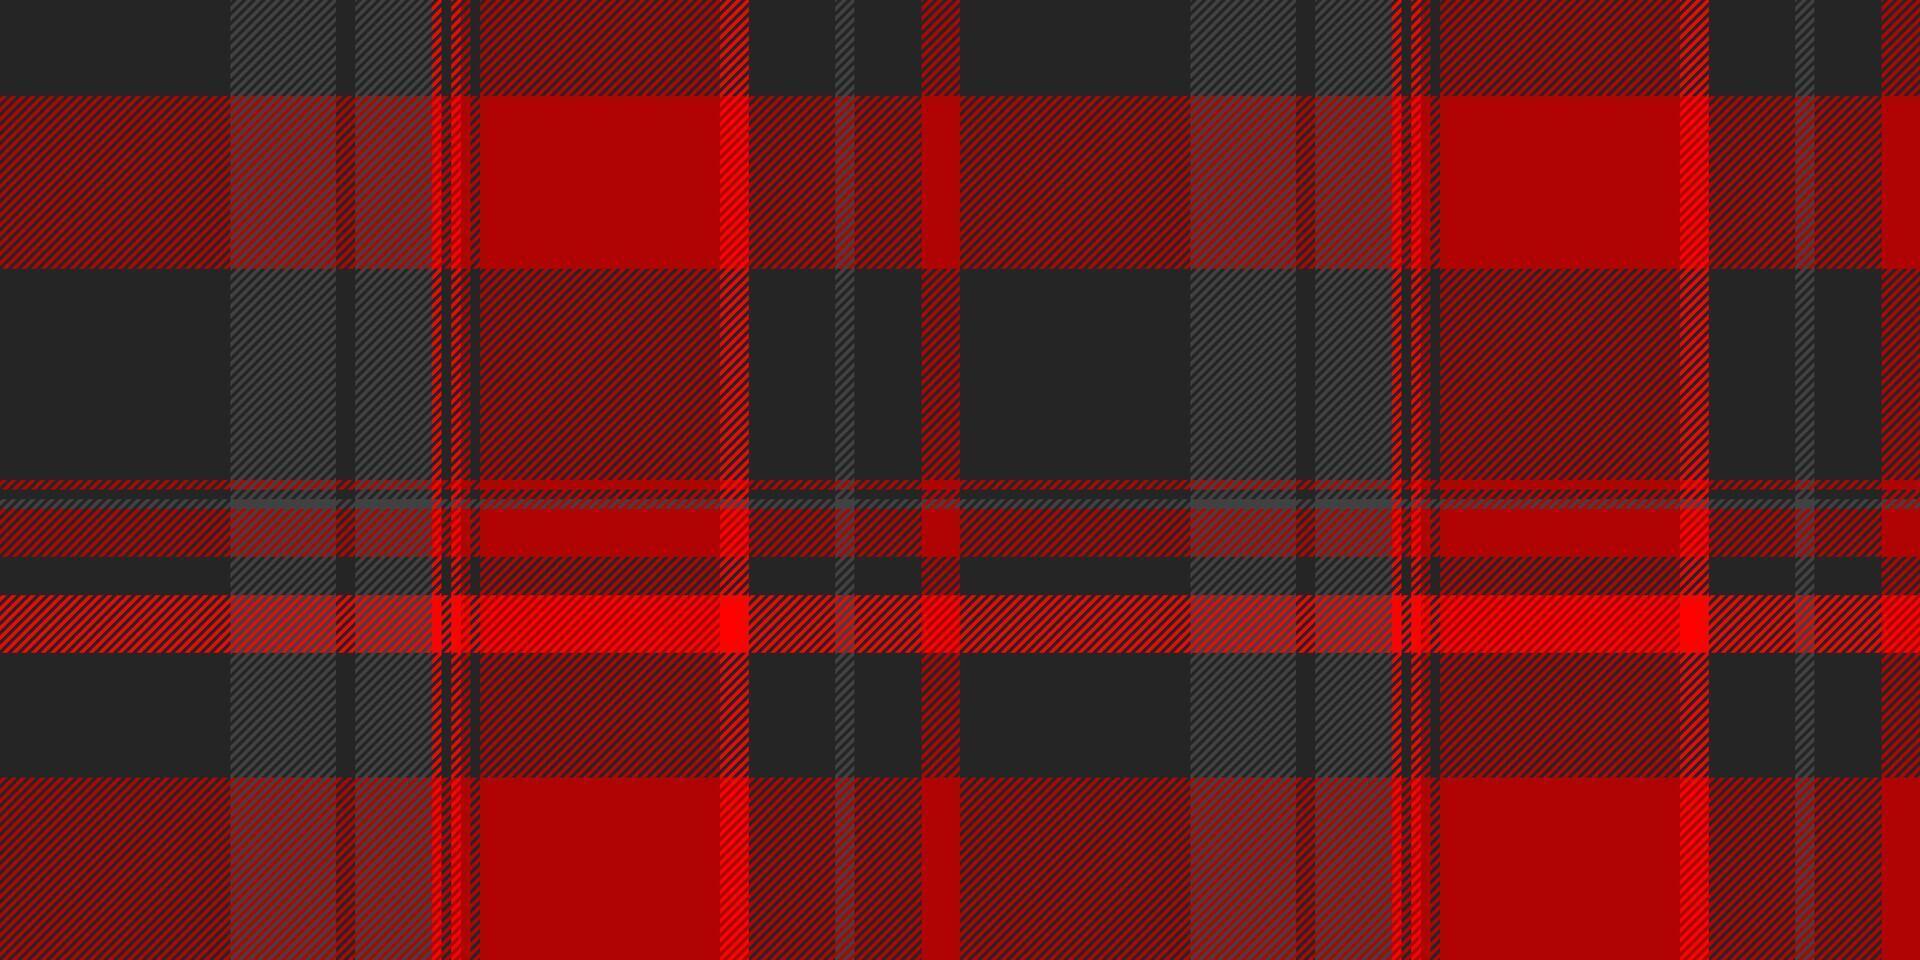 Complexity textile tartan plaid, trousers pattern background. Traditional check seamless texture fabric in red and black colors. vector